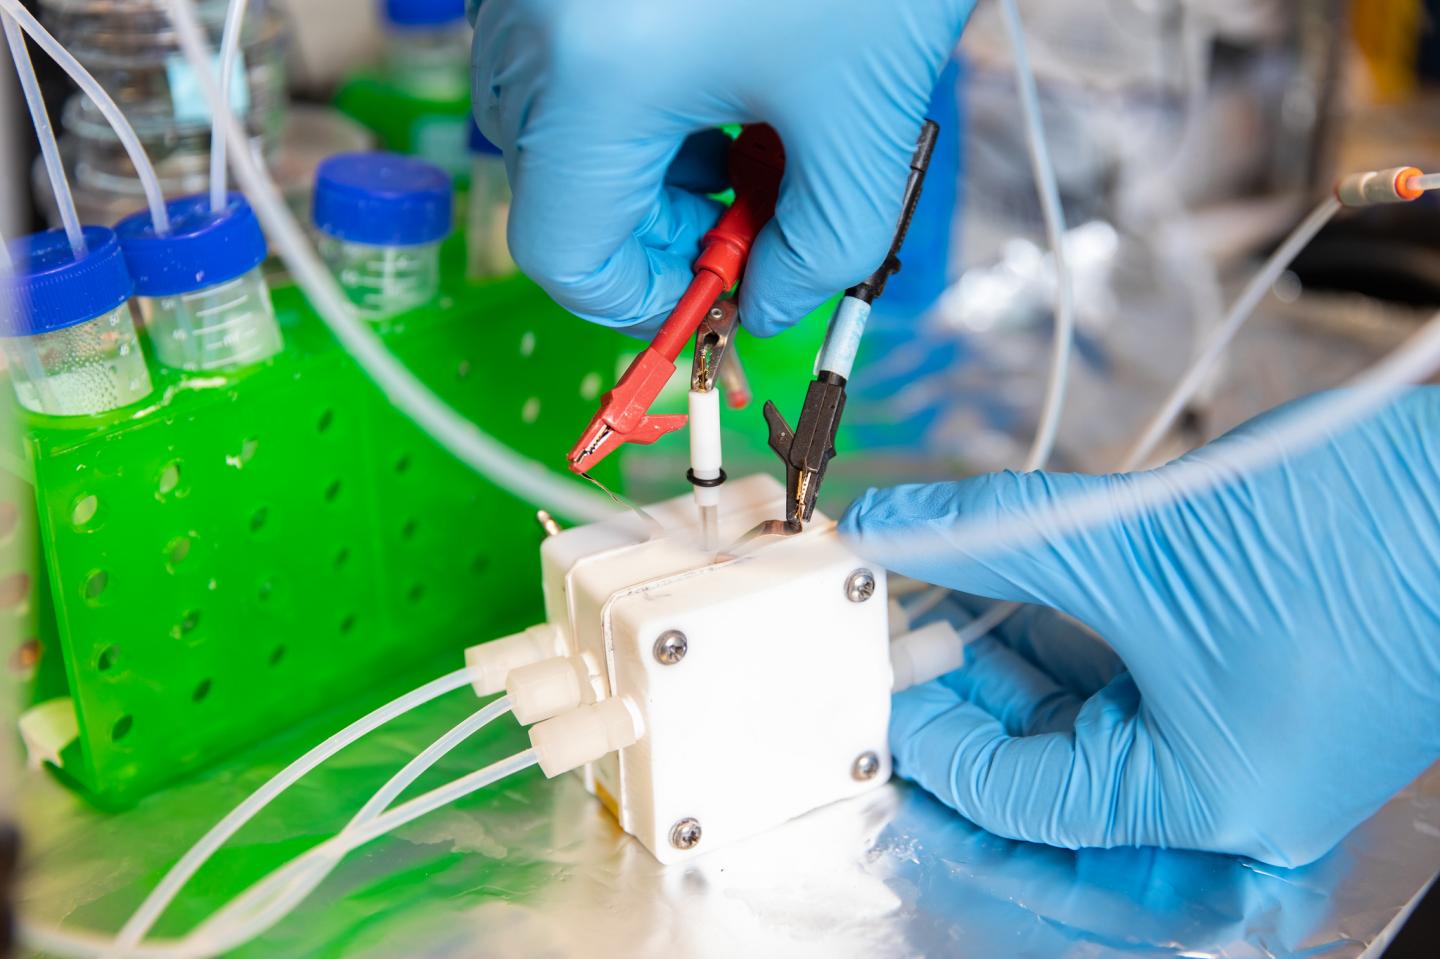 Using Electrolyzers like This One to Convert Waste CO2 into Commercially Valuable Chemicals